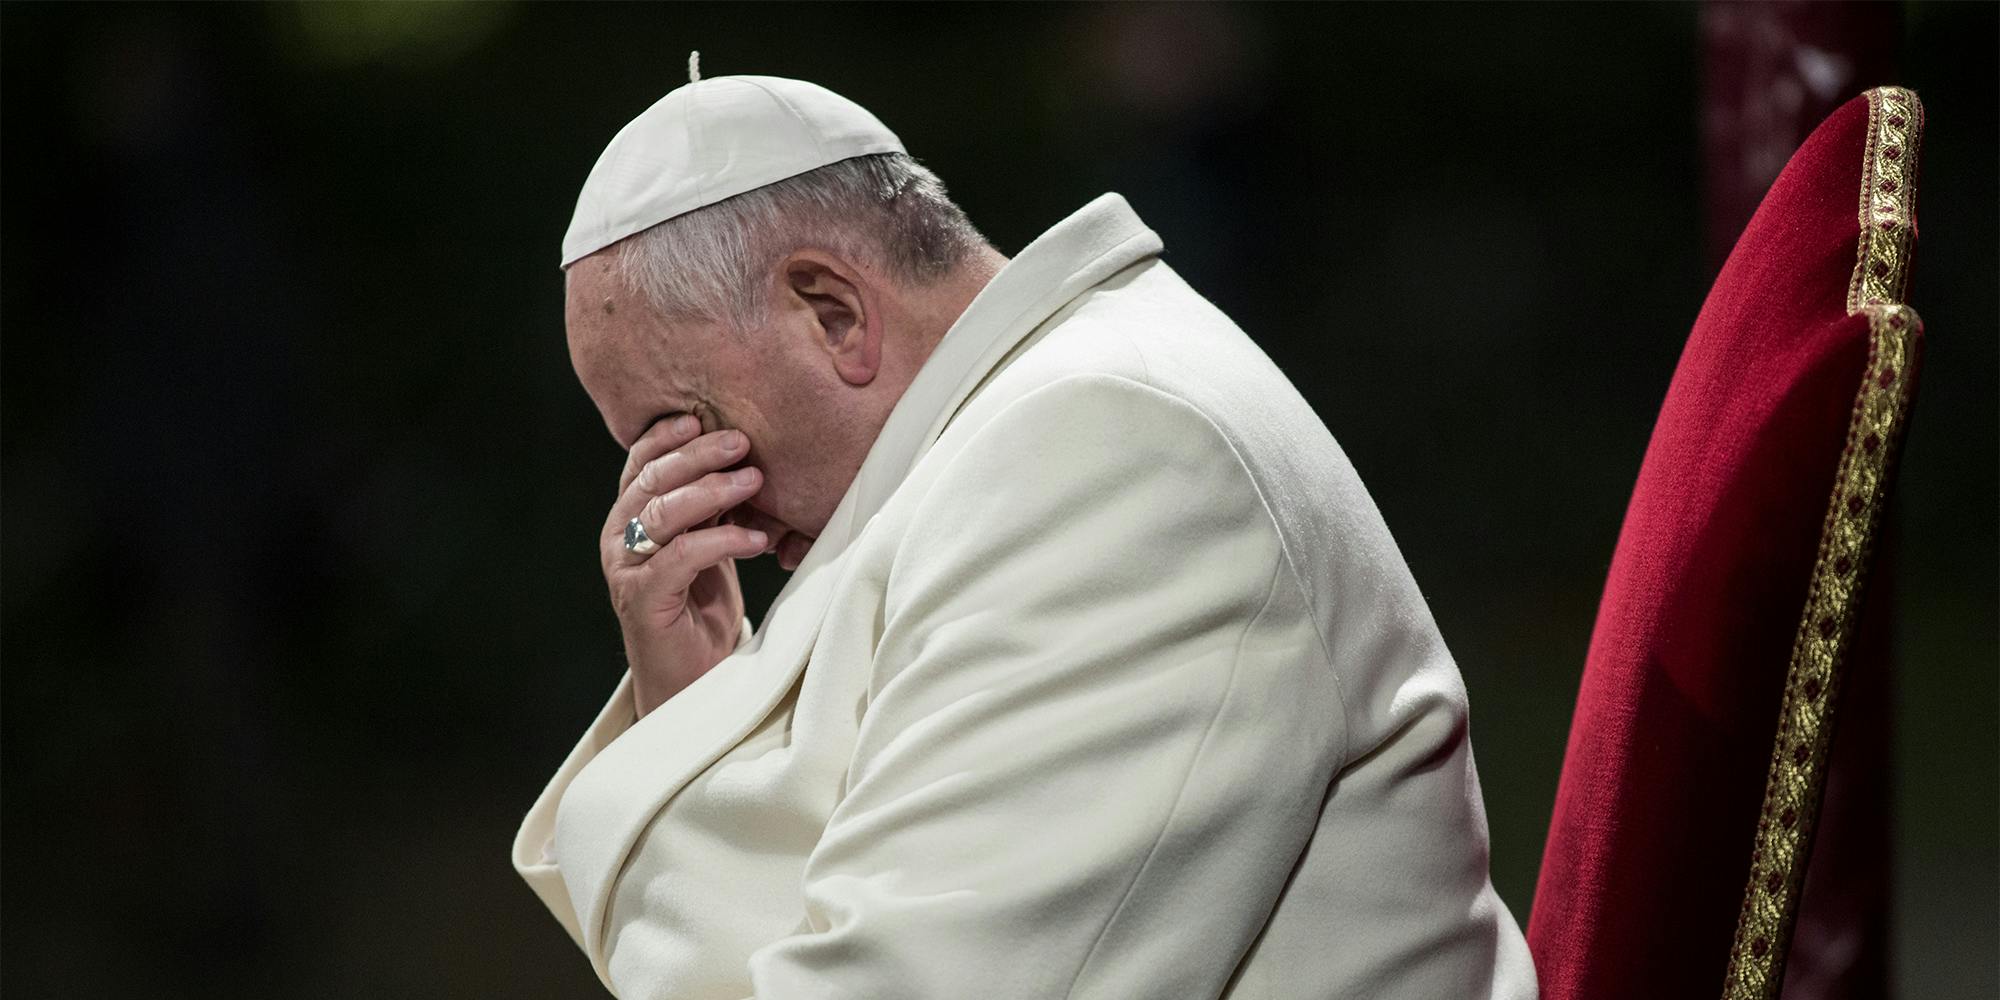 Pope Francis’ Instagram account apparently liked a second racy post